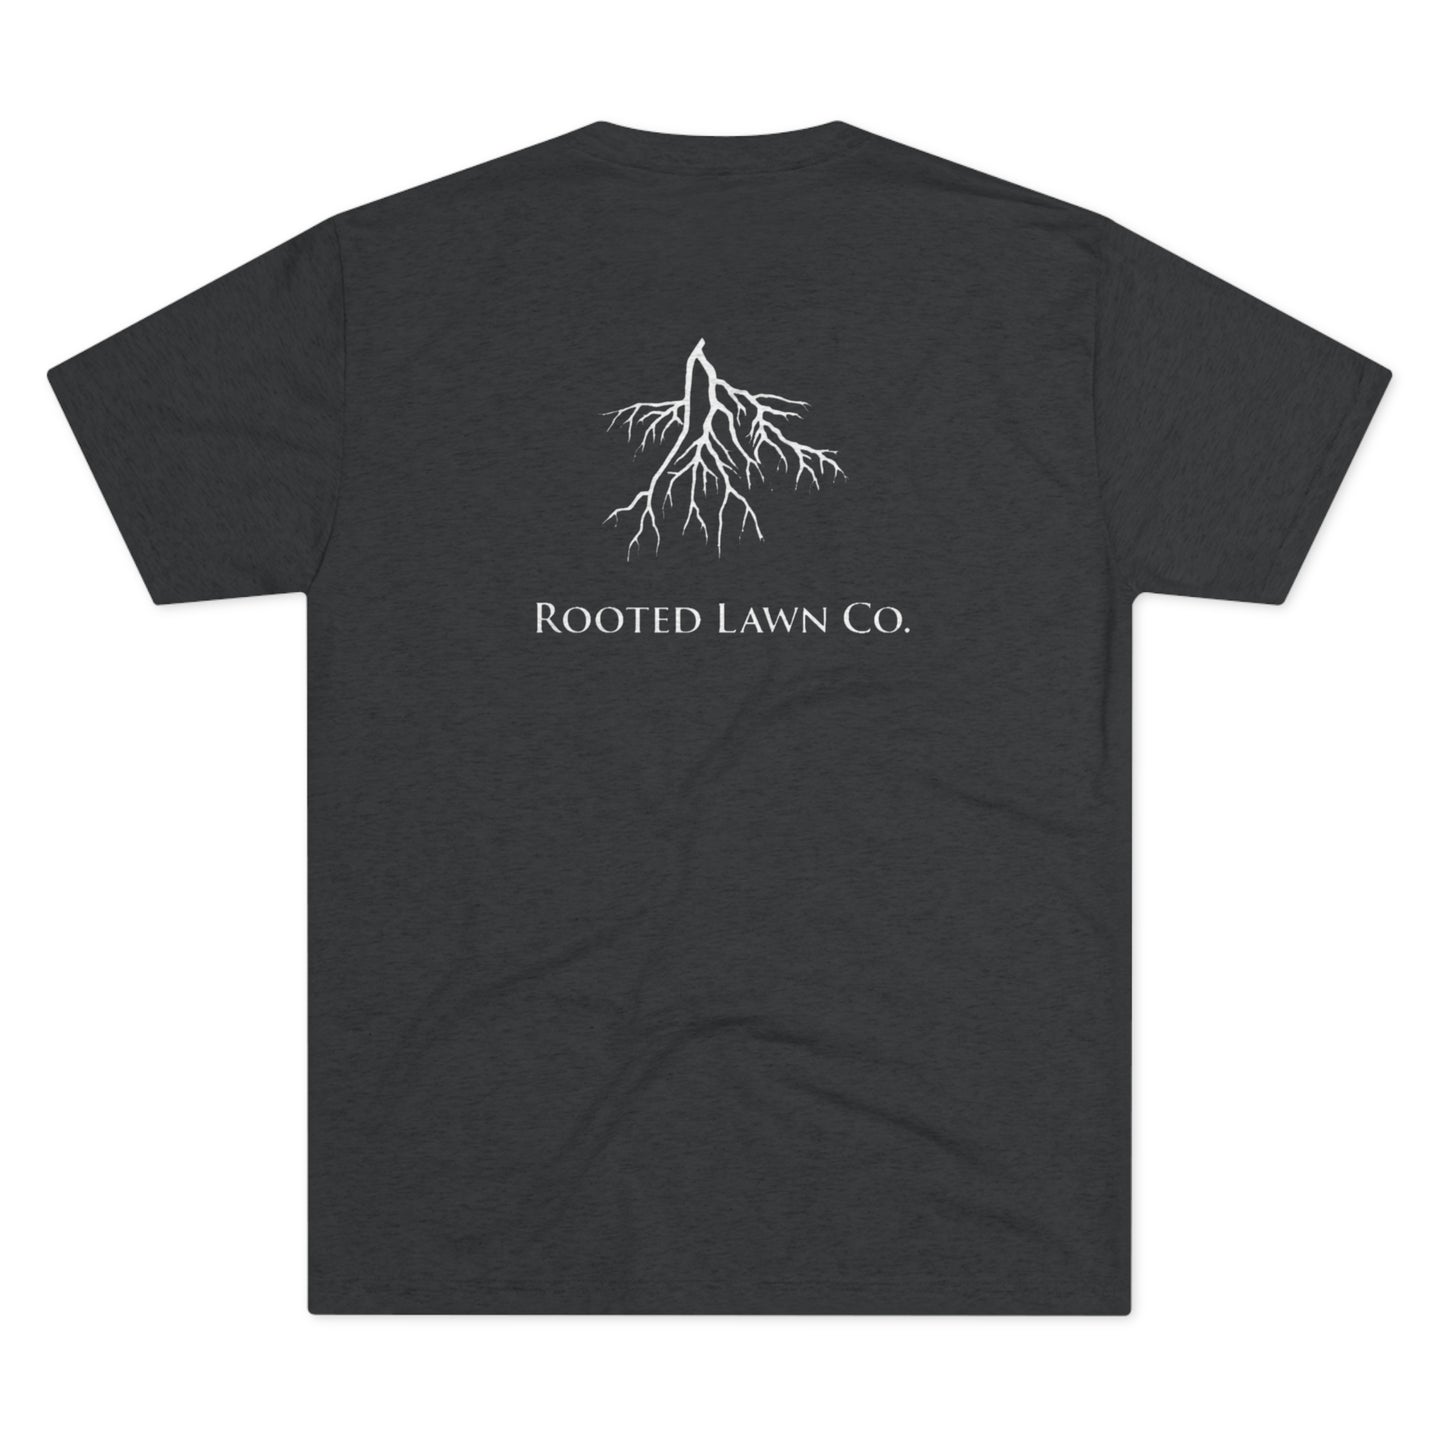 Rooted Lawn Co Tee